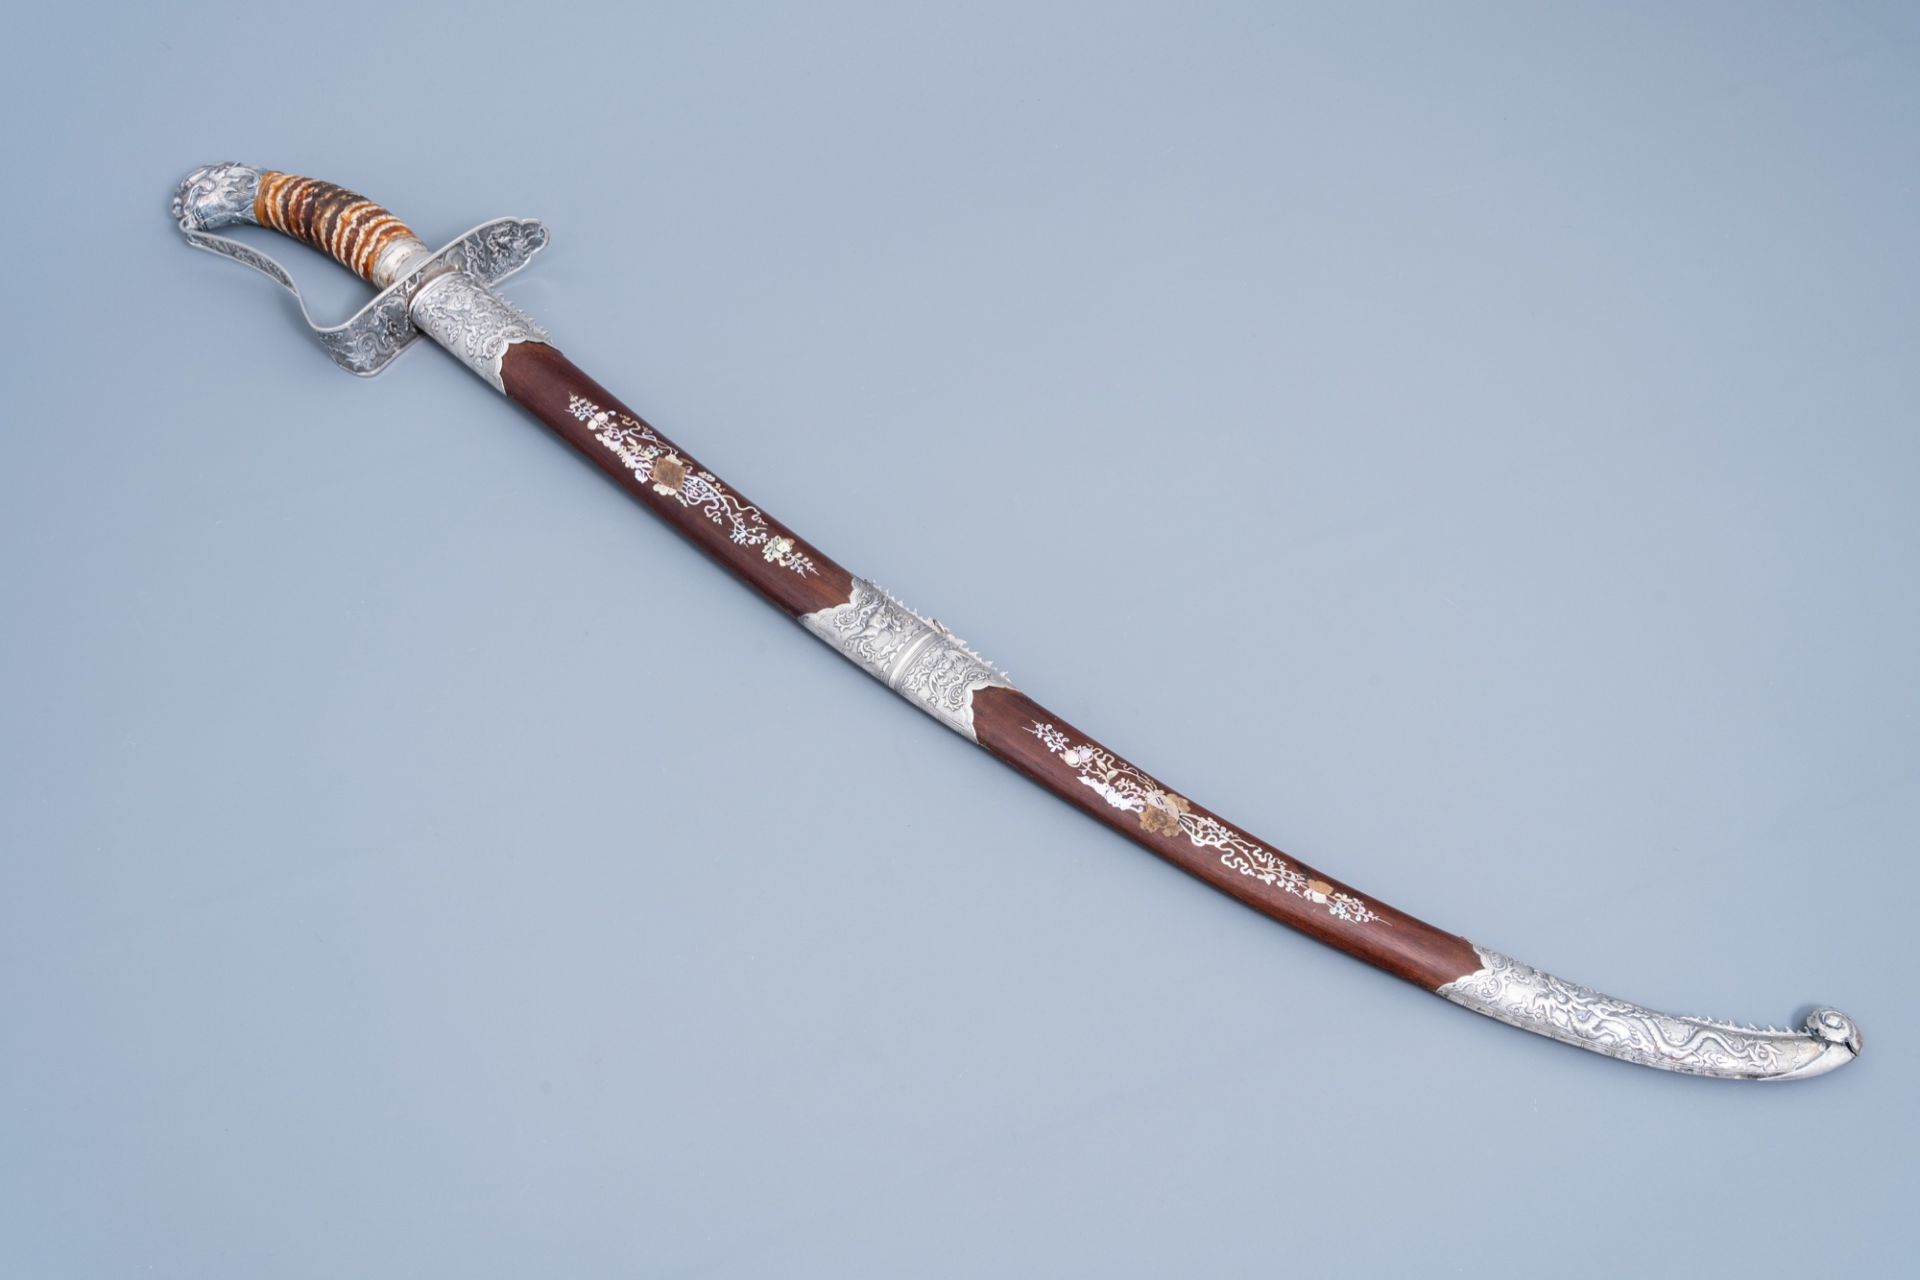 AÊ ceremonial Vietnamese 'guom' sword with silver and mother-of-pearl inlaid wooden scabbard with dr